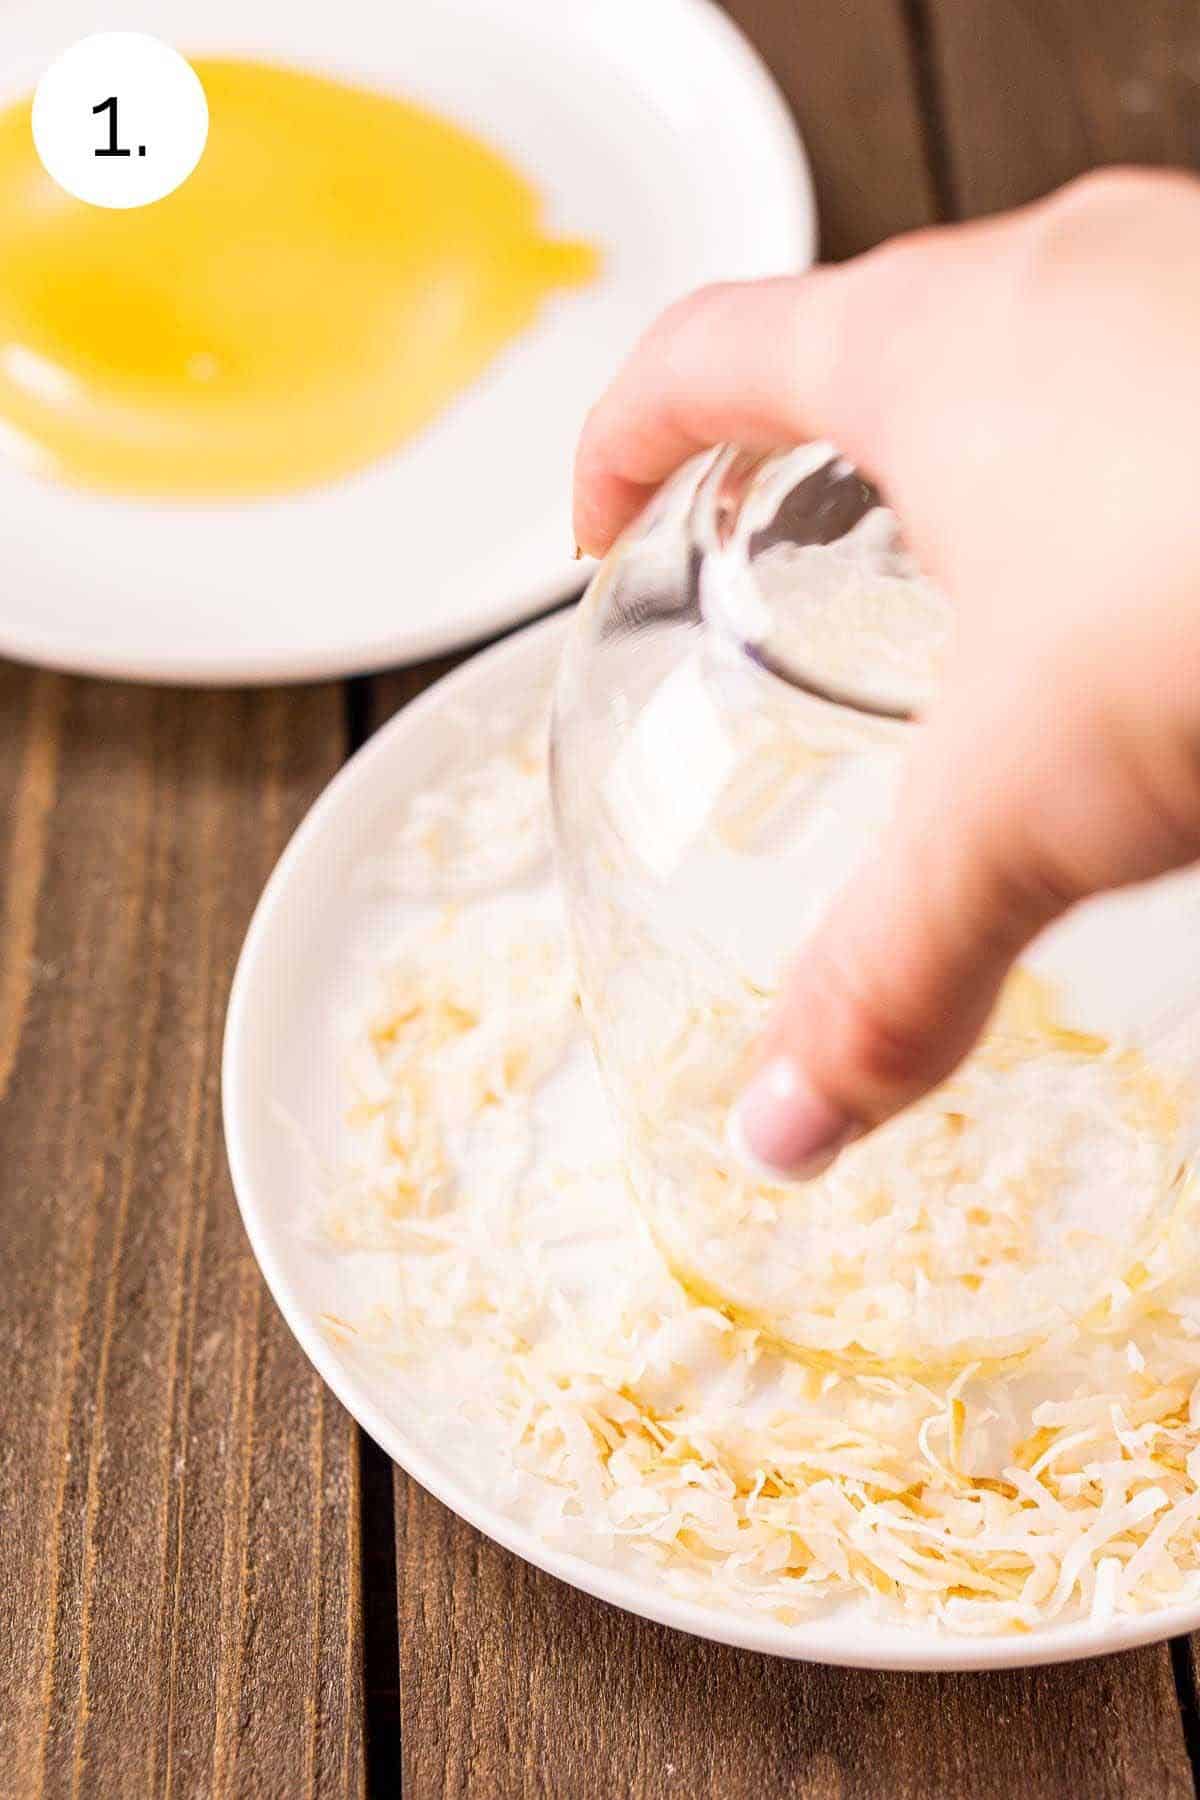 Swirling the glass in toasted coconut on a small white plate.